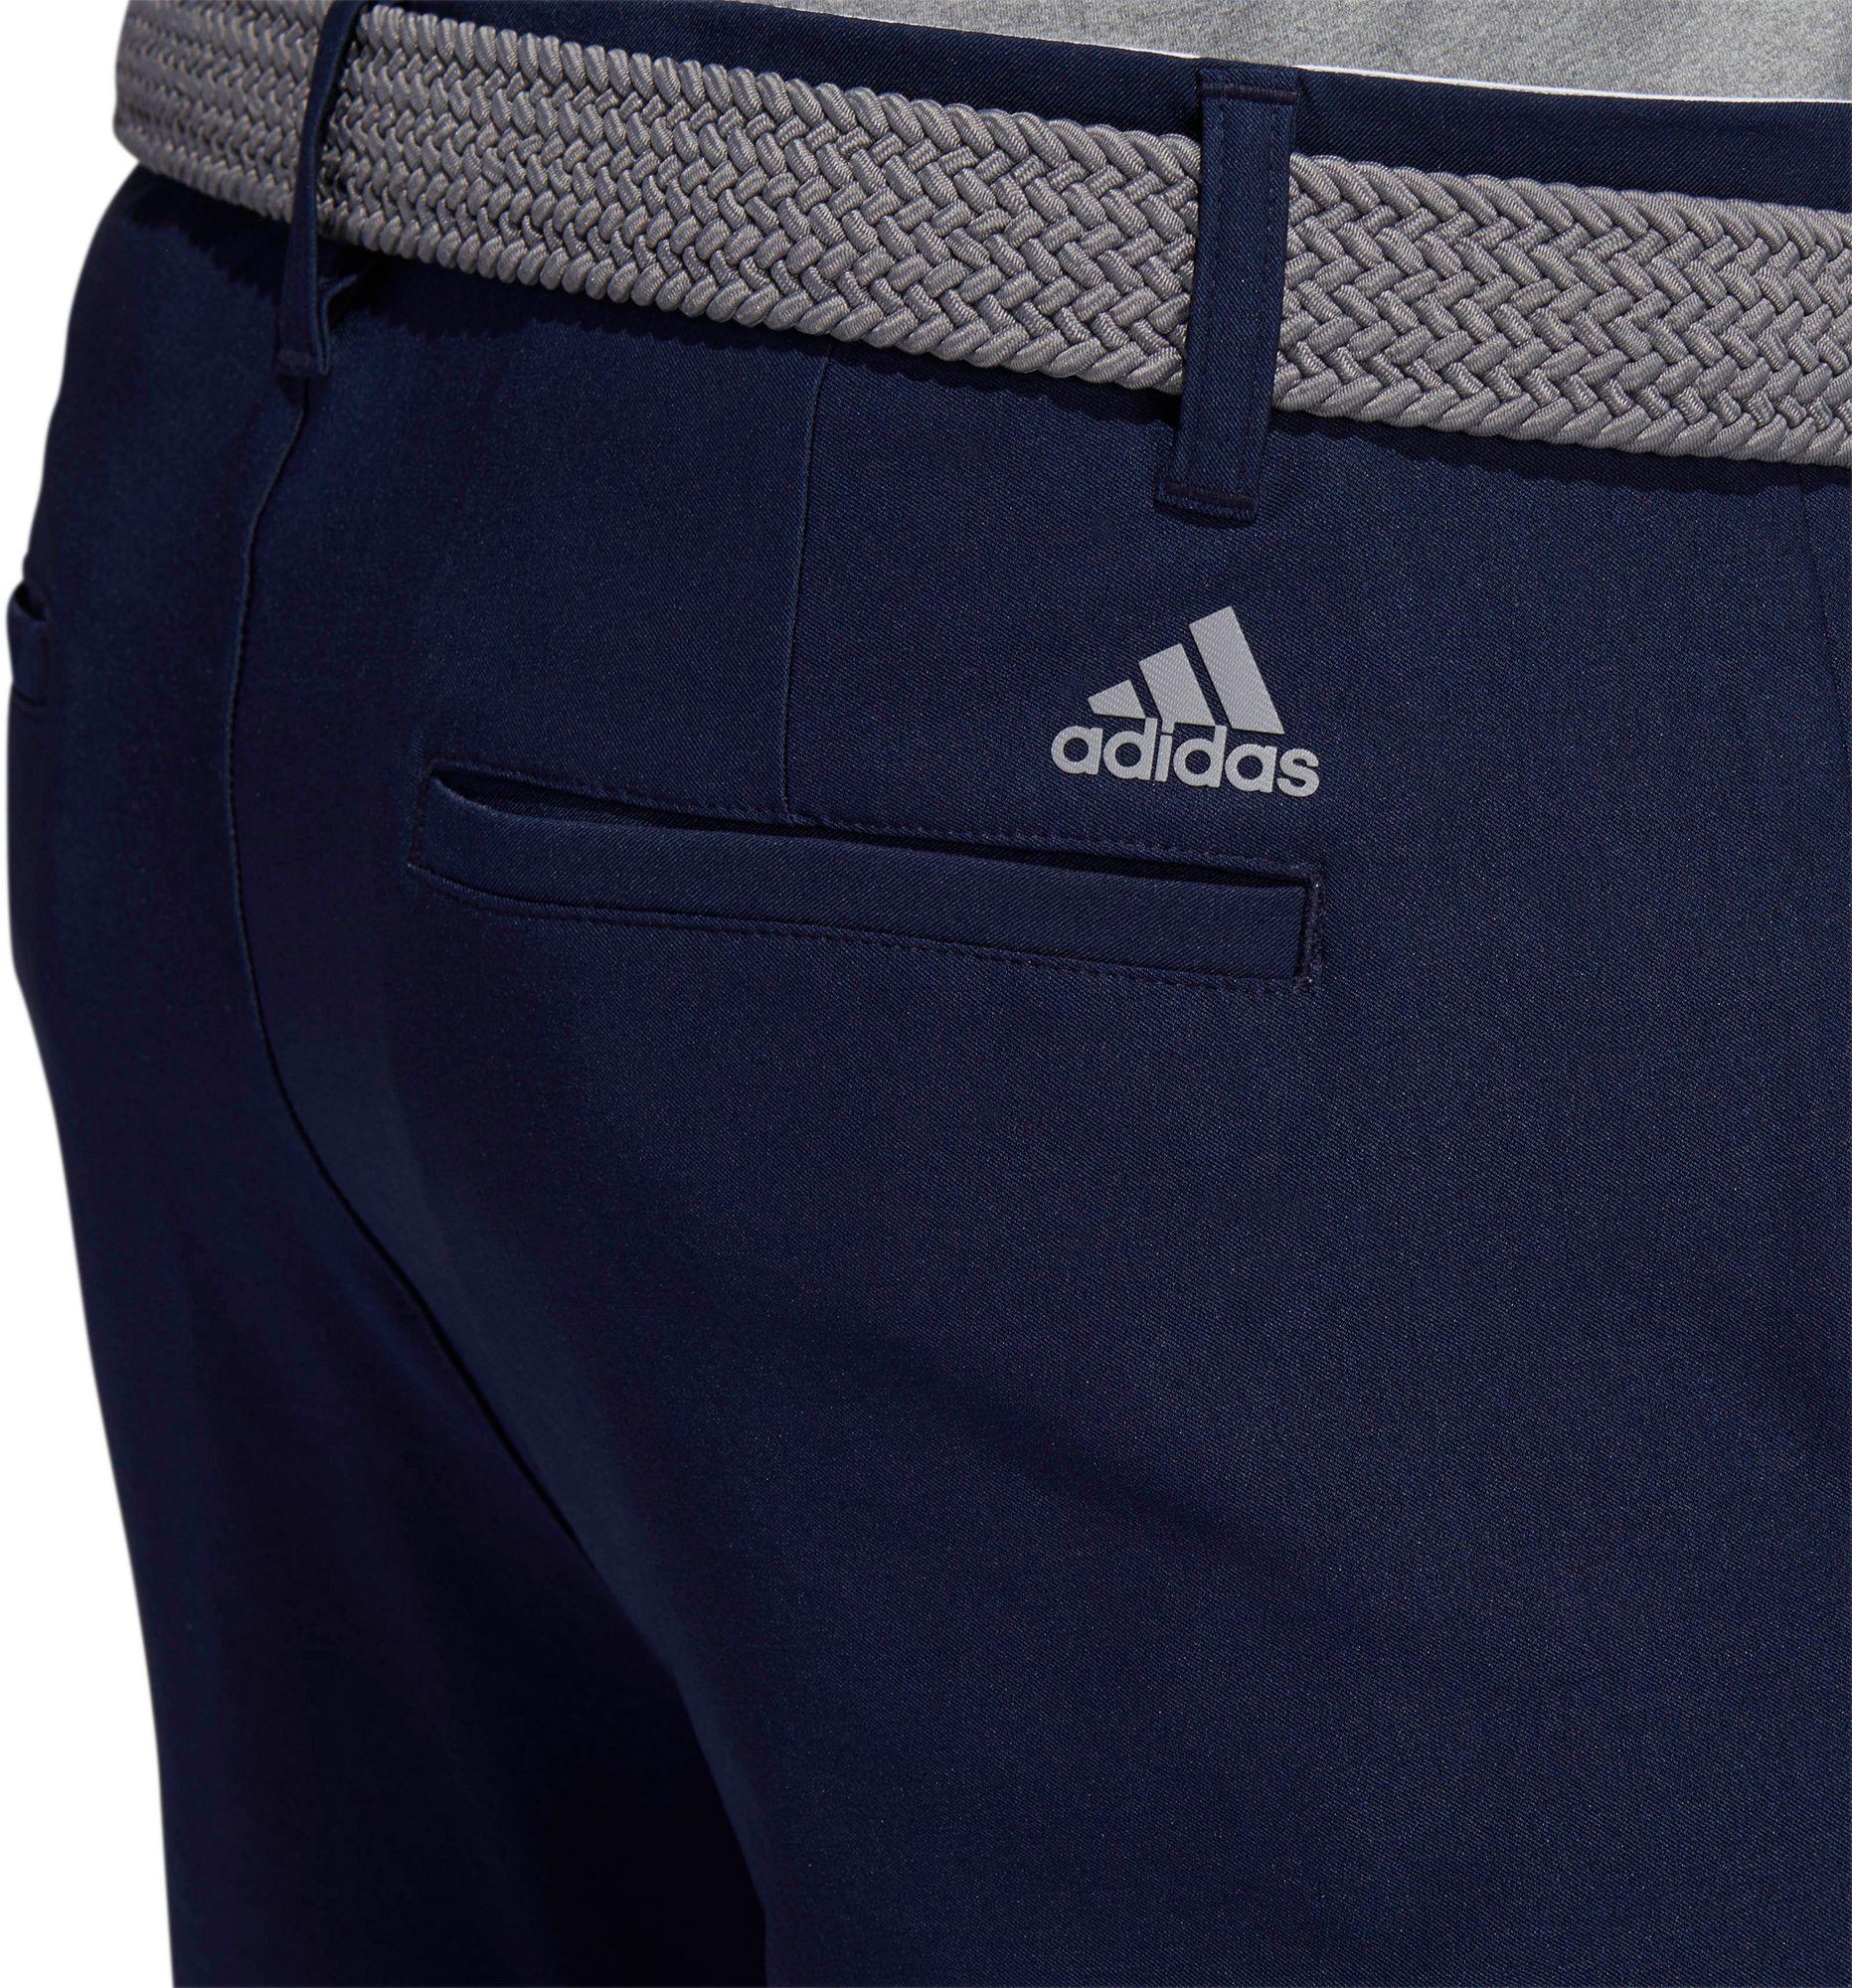 adidas Synthetic Ultimate365 Classic Golf Pants in Blue for Men - Lyst